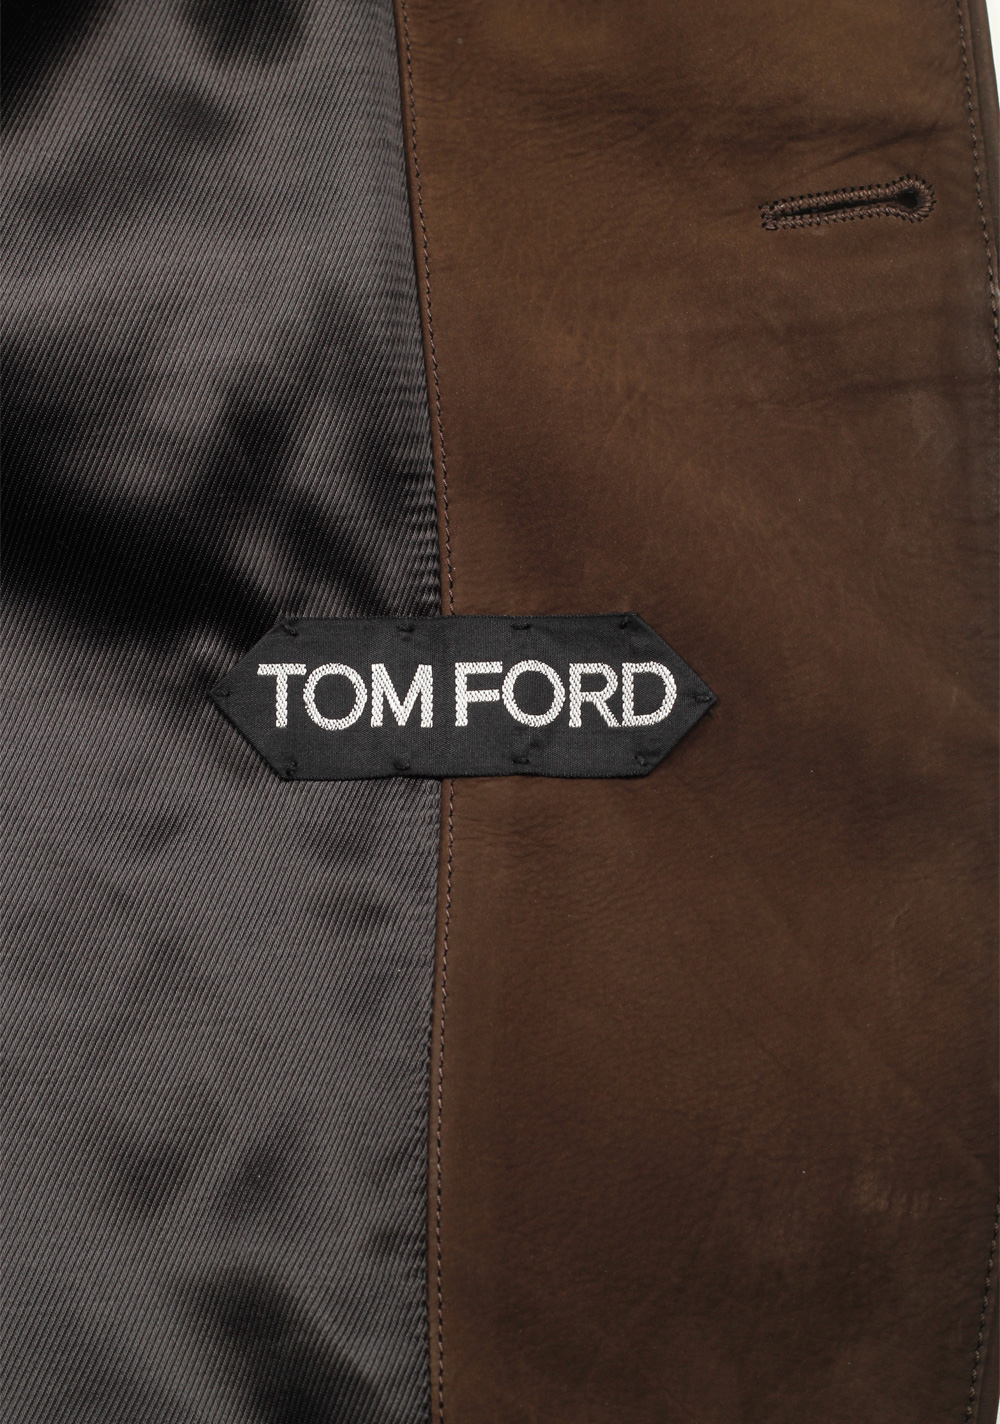 TOM FORD Brown Cashmere Sartorial Leather Suede Jacket Coat Size 48 ...